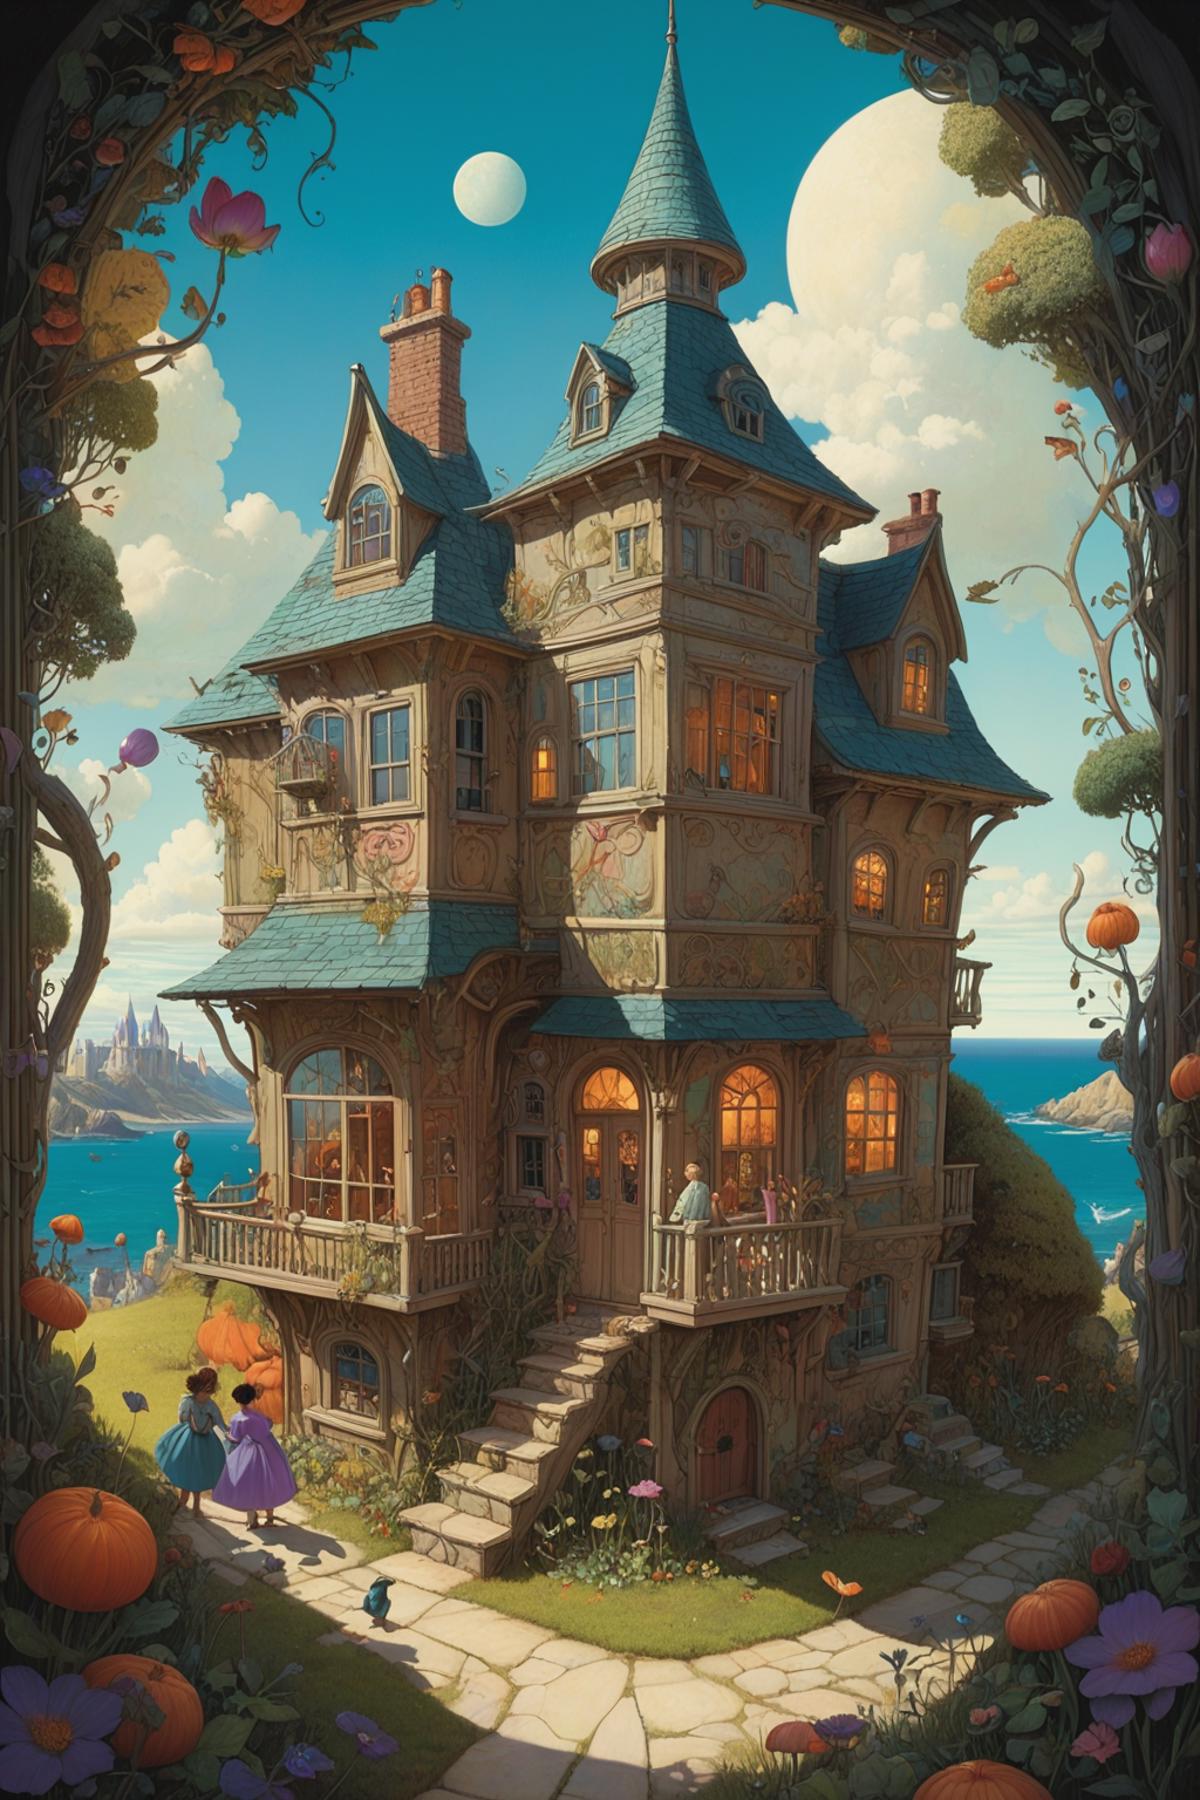 A whimsical painting of a large, blue, multi-story house with a wrap-around porch.